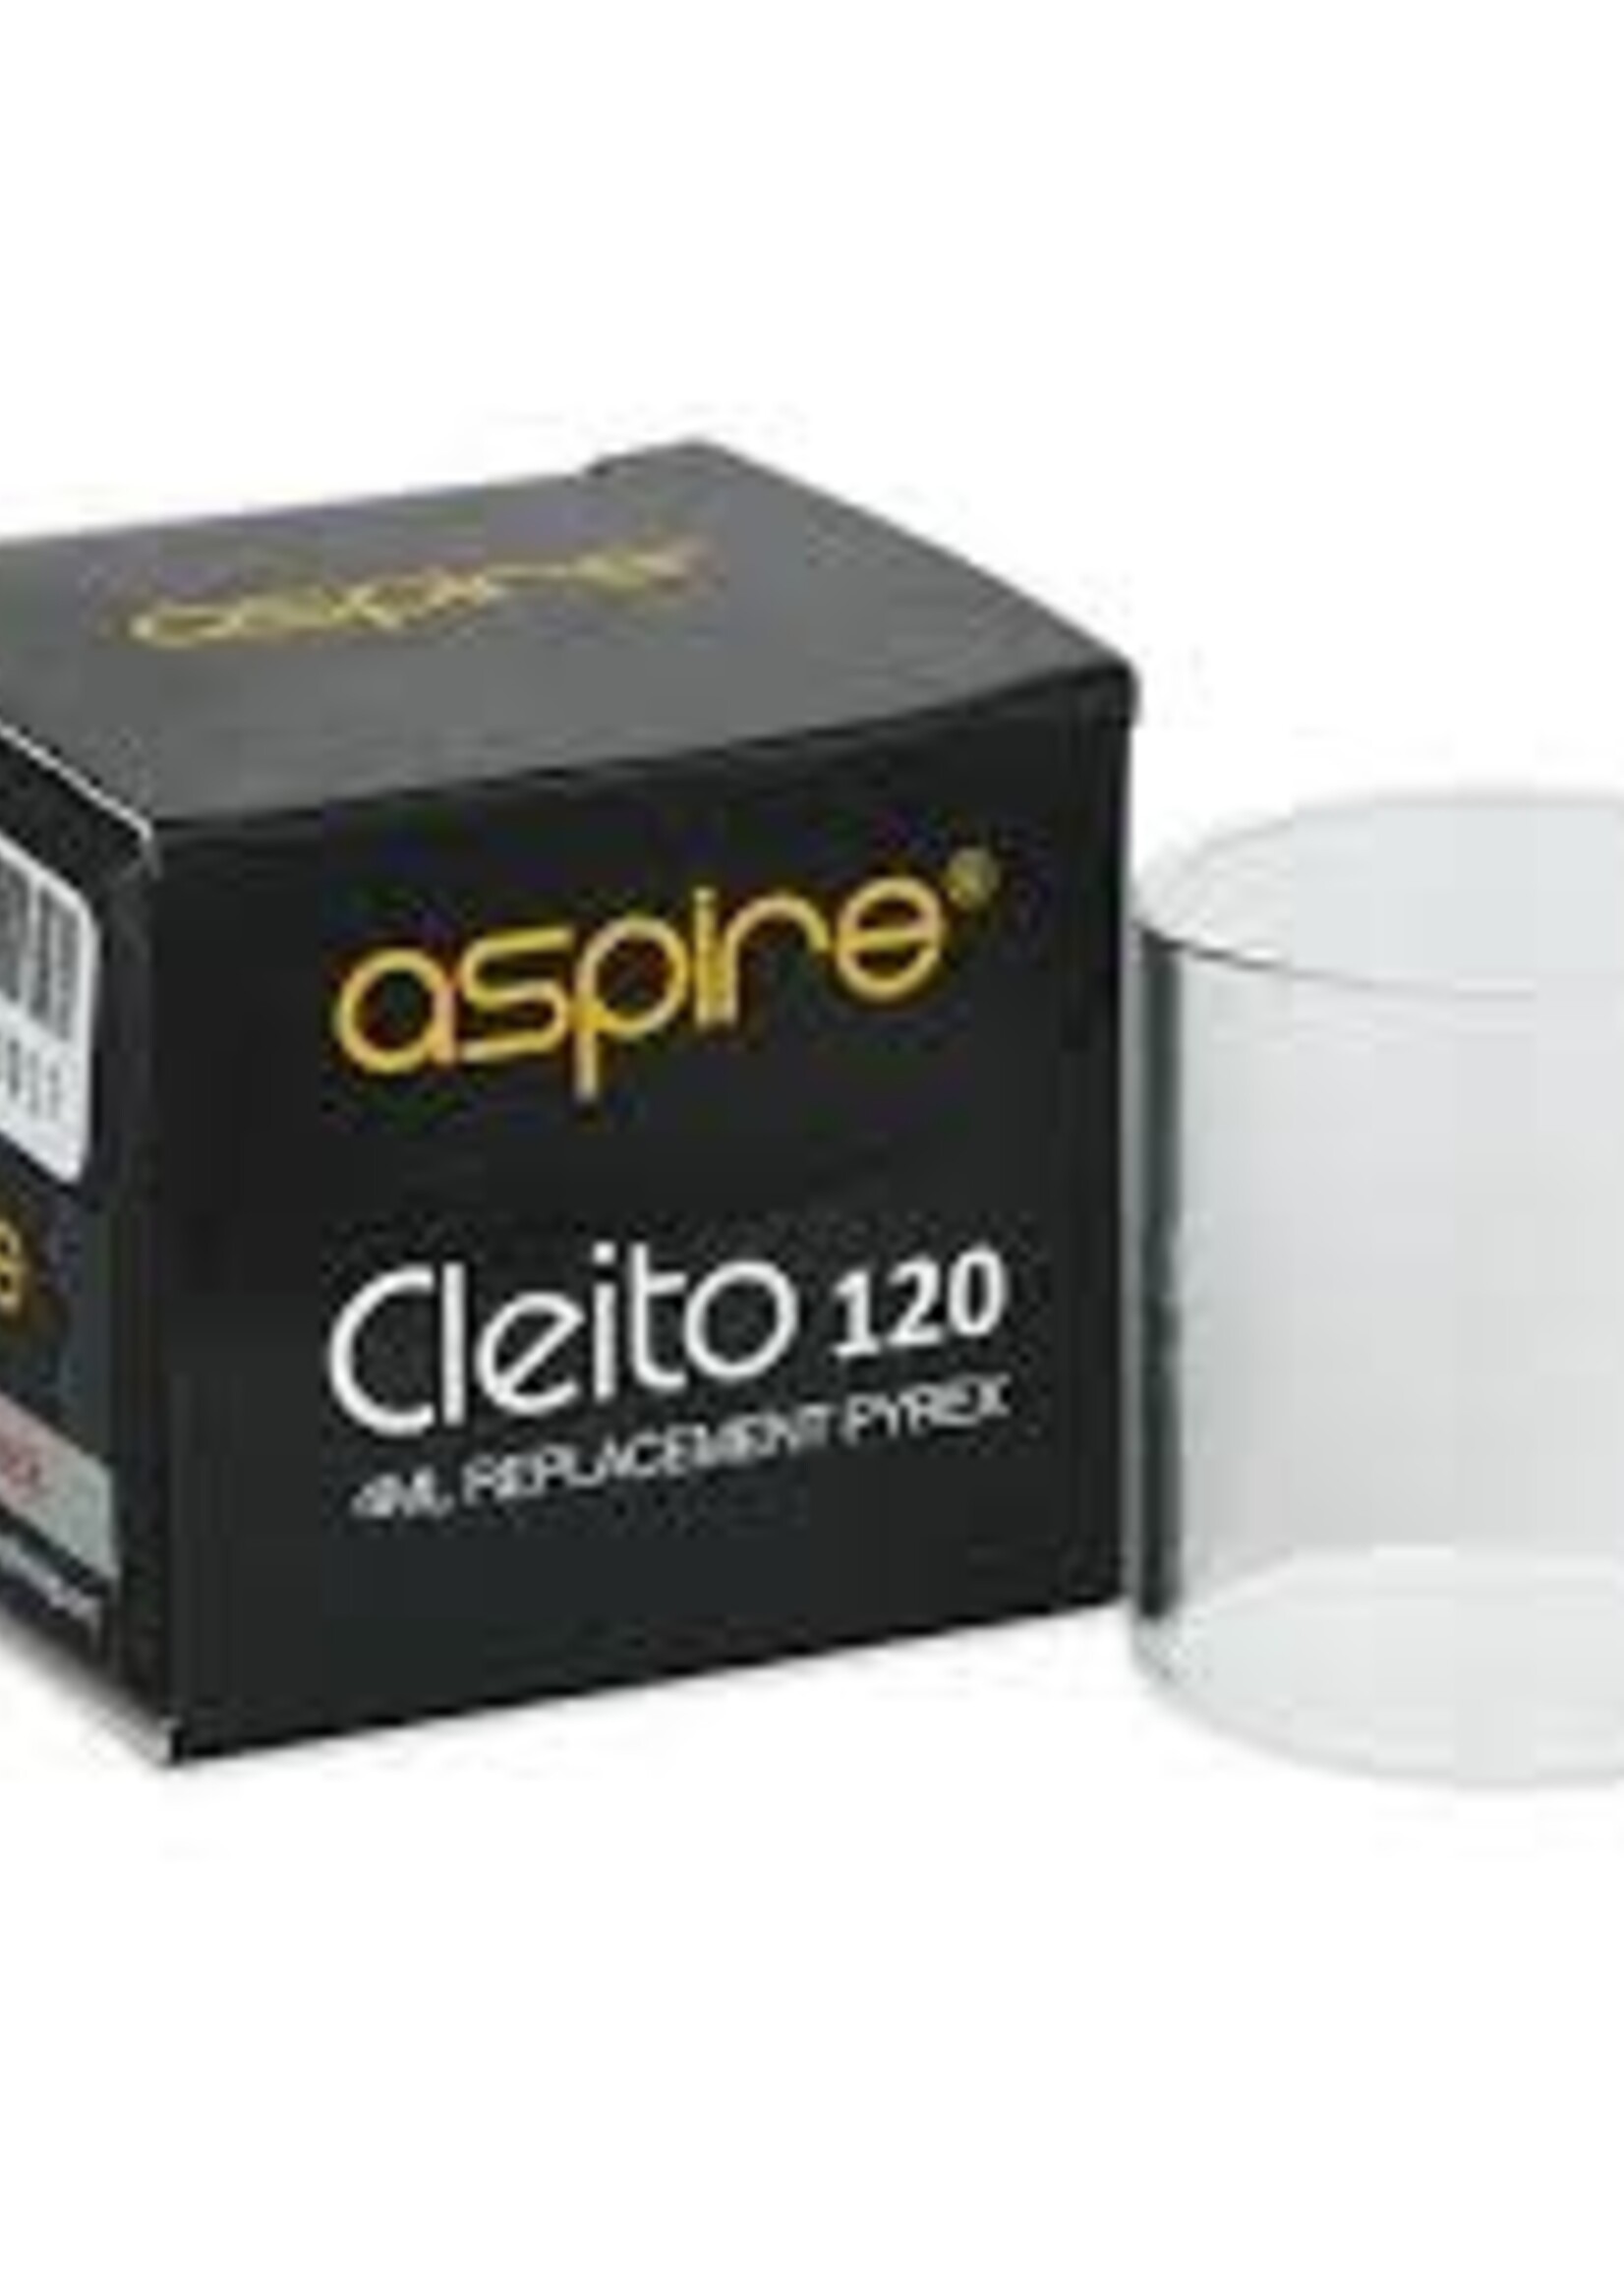 ASPIRE ASPIRE CLEITO 120 REPLACEMENT GLASS